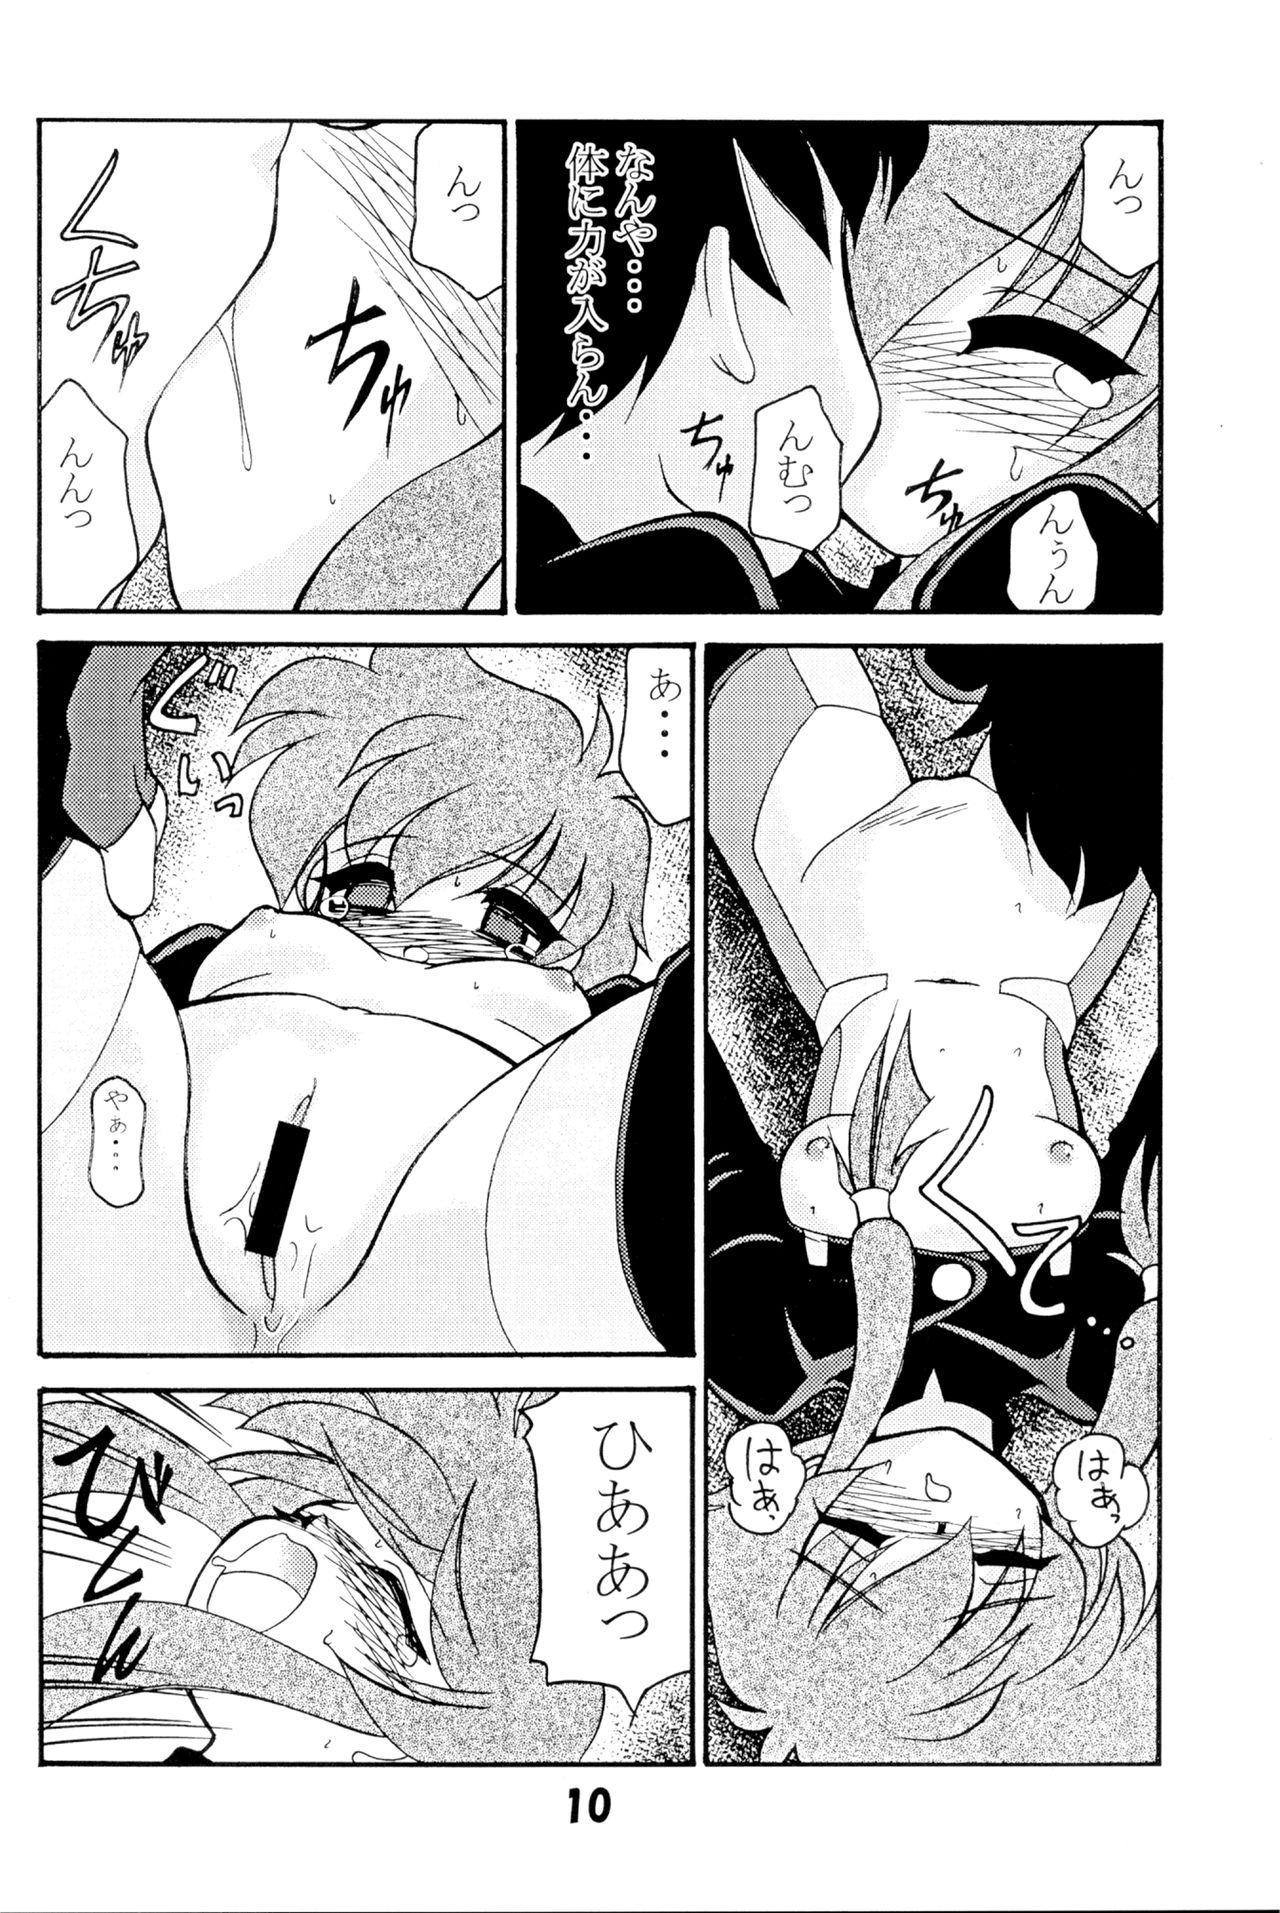 Gaycum VERSUS - Magic knight rayearth Angelic layer Phat Ass - Page 9